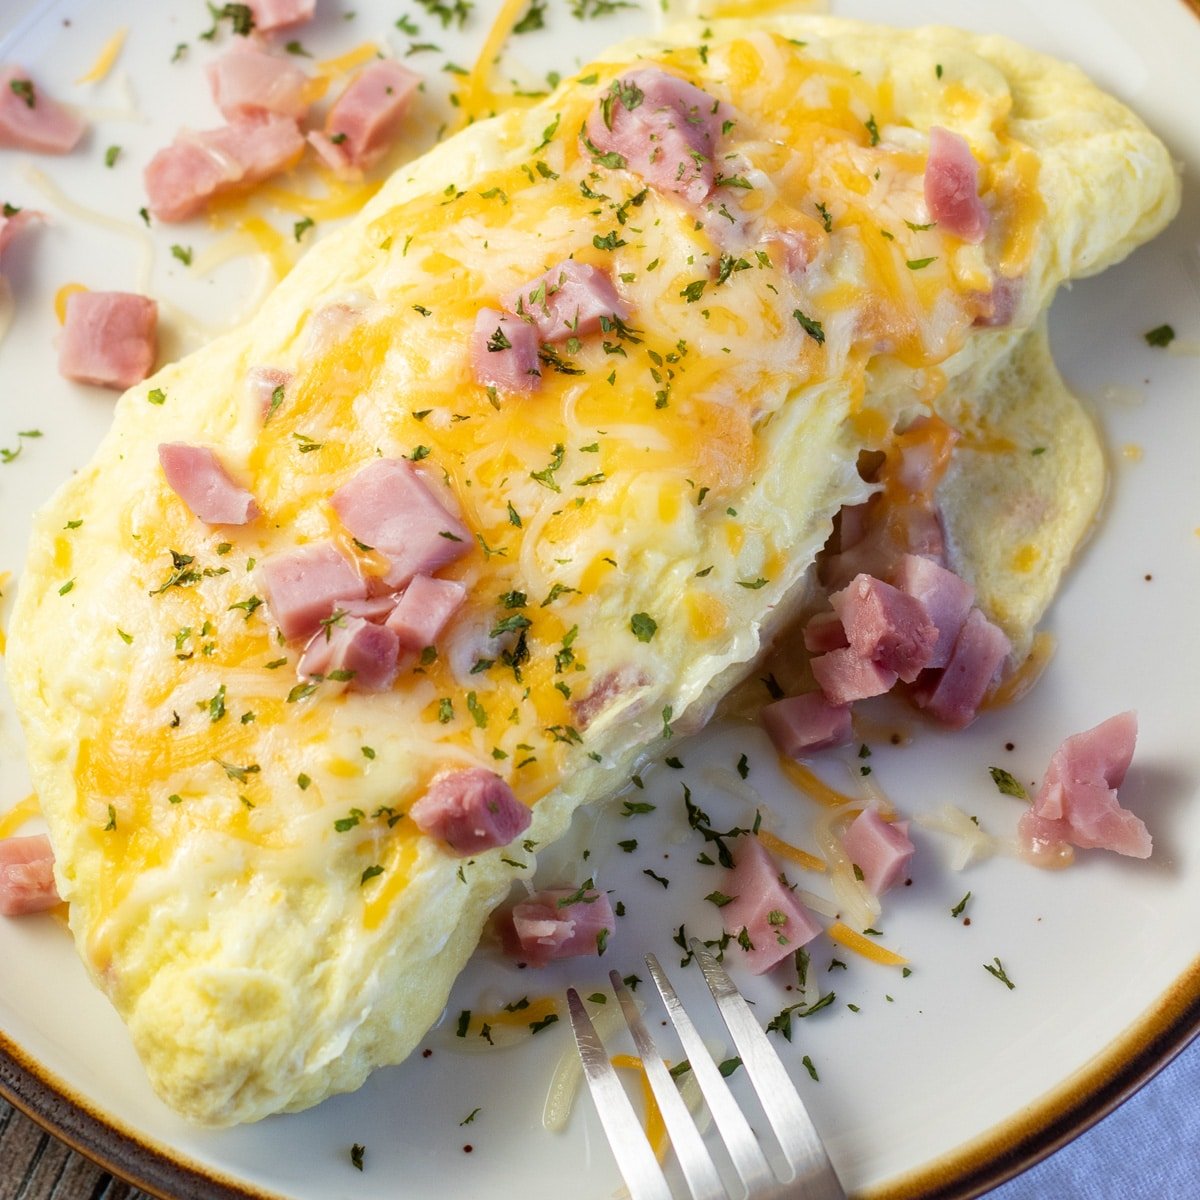 https://bakeitwithlove.com/wp-content/uploads/2022/09/microwave-omelet-sq1.jpg